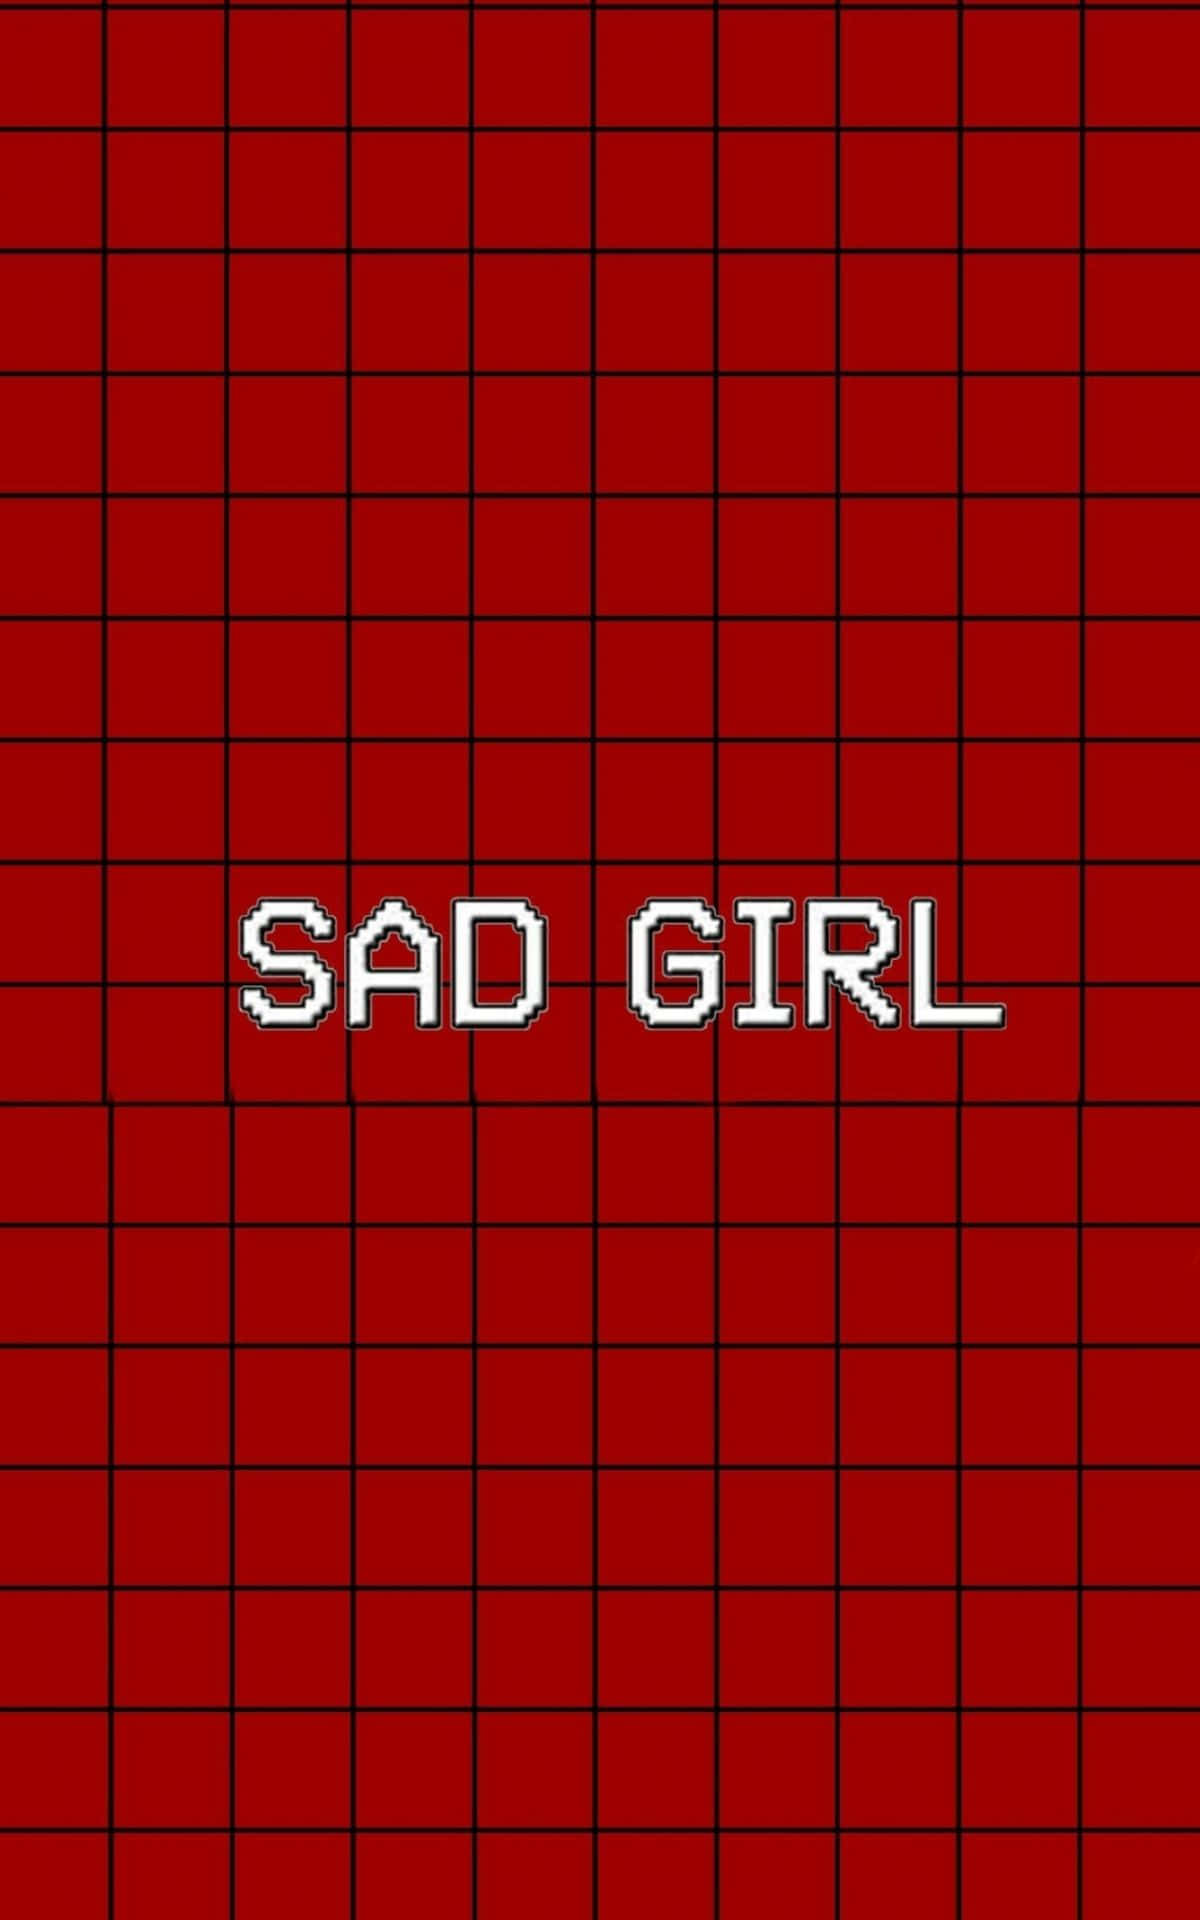 Sad Girl With Black And Red Aesthetic Grid Illustration Wallpaper